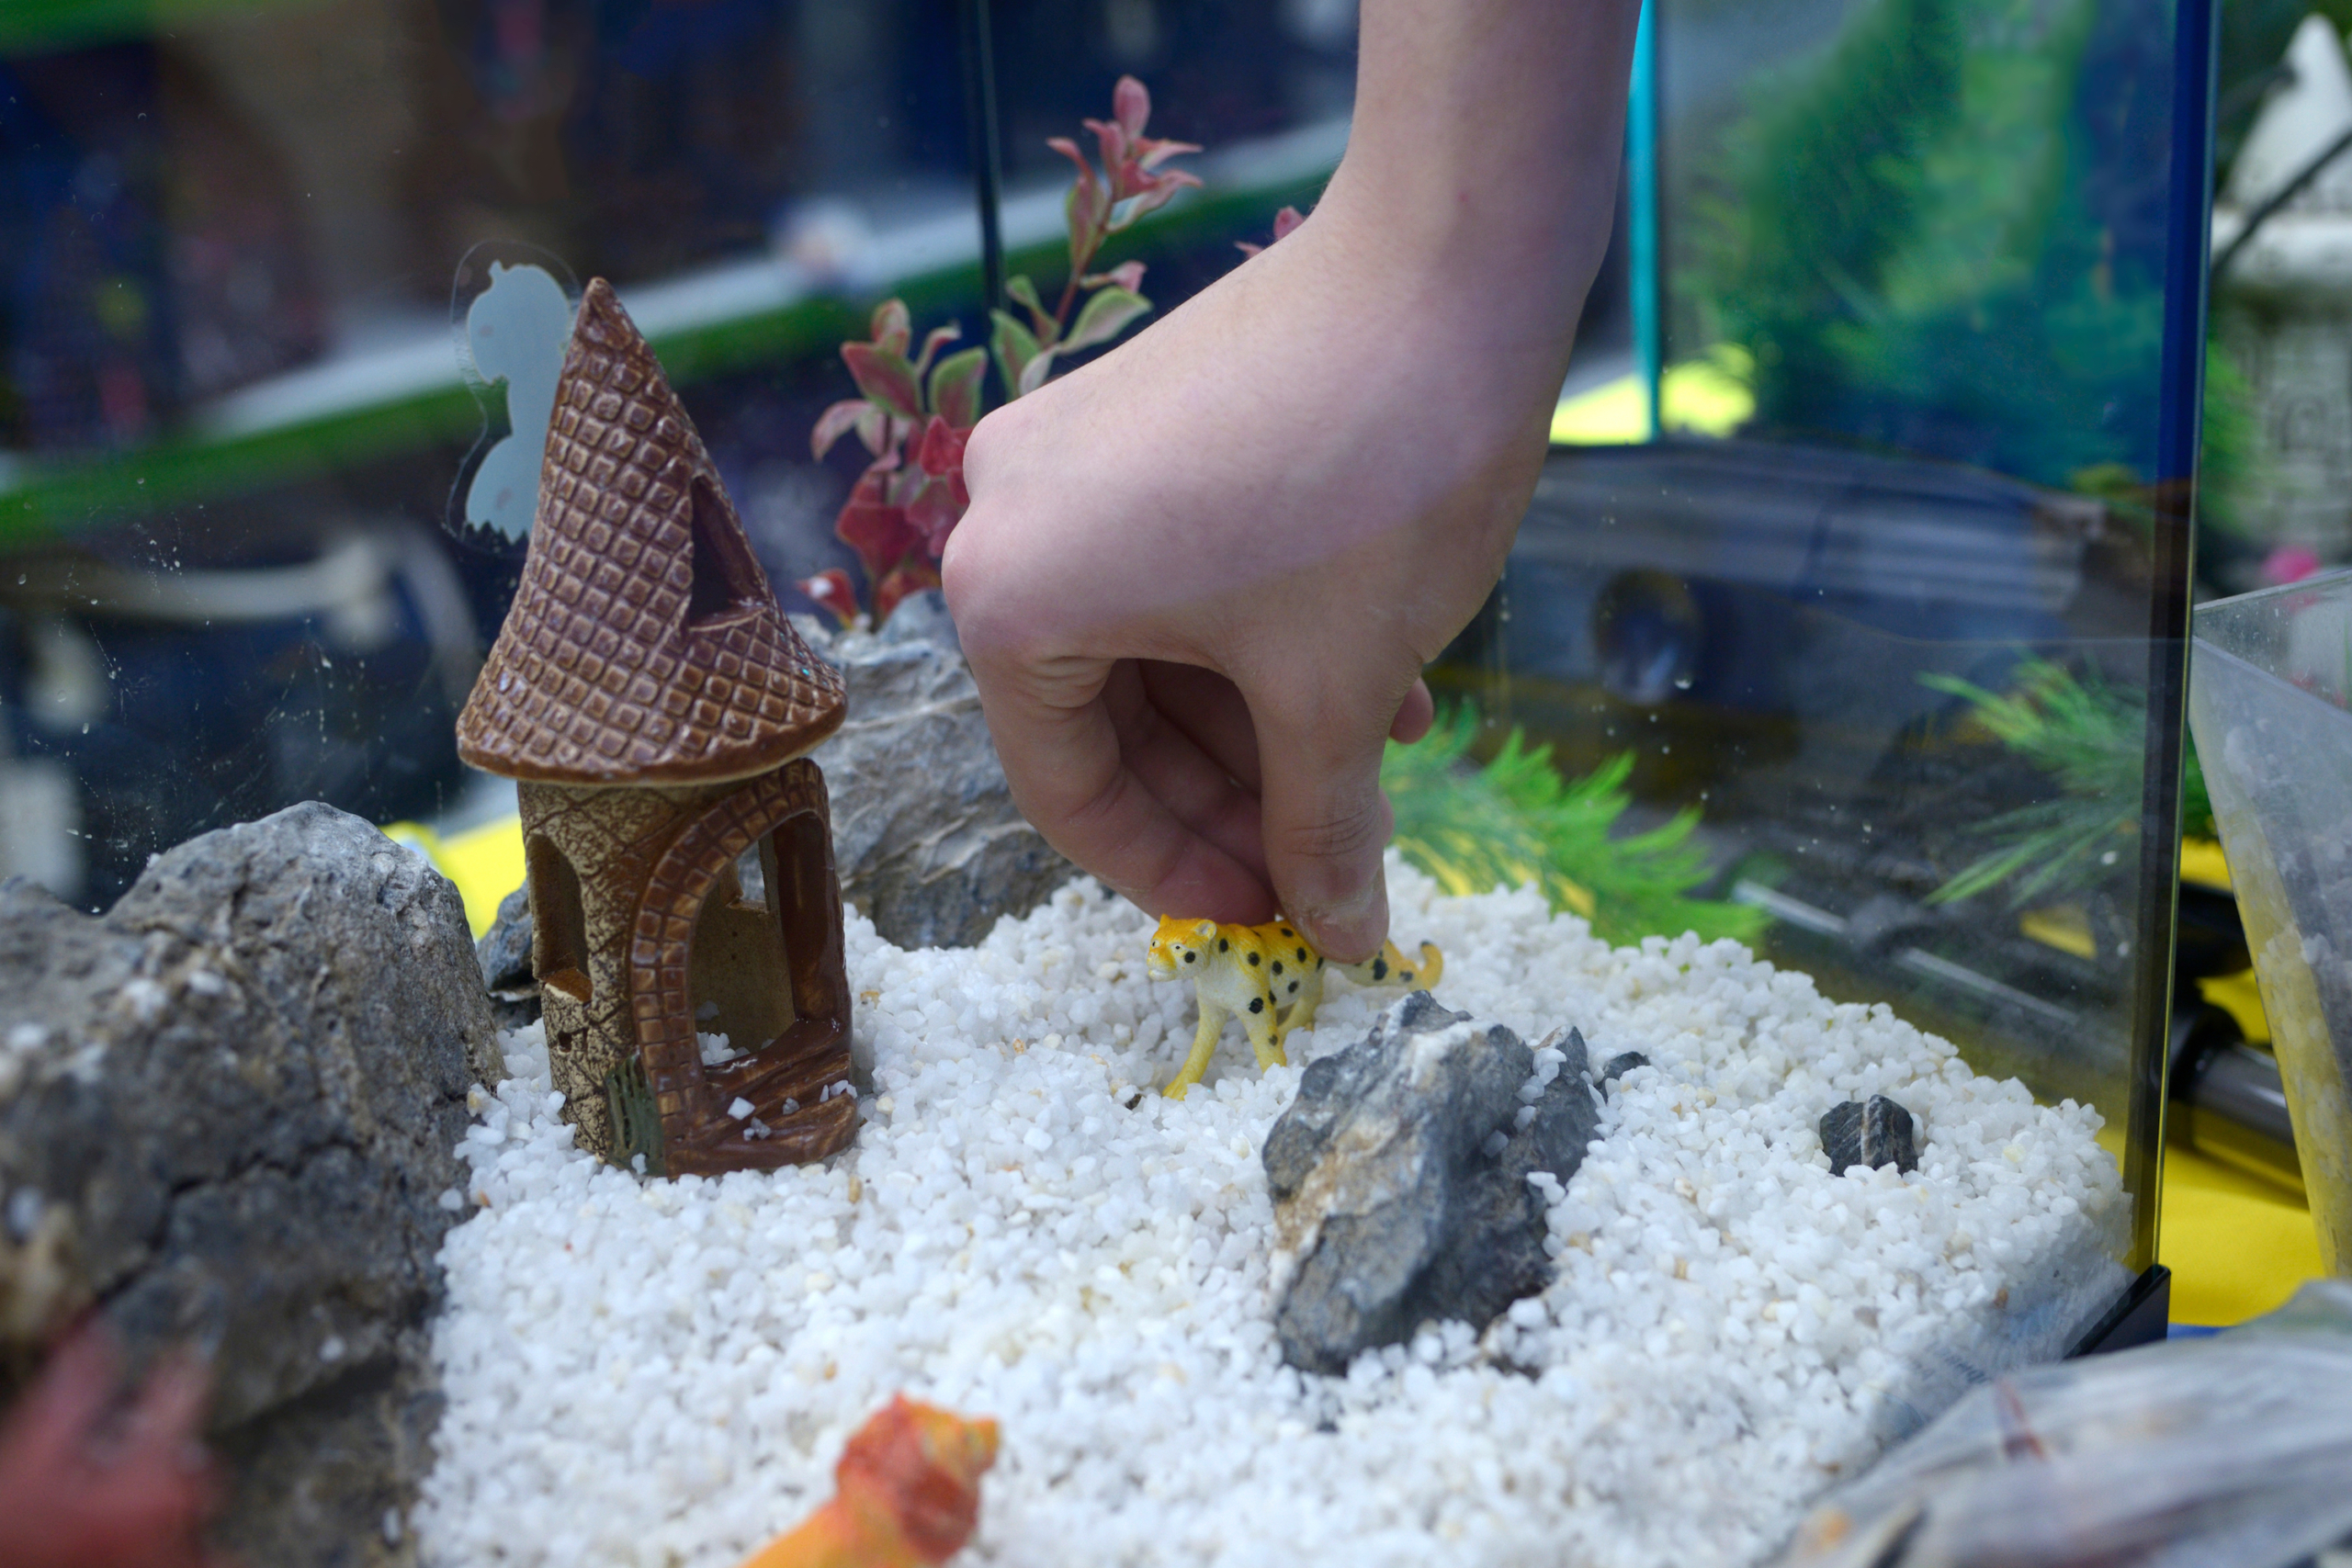 Decoration Do's and Don'ts. The aquarium pictured above looks fun